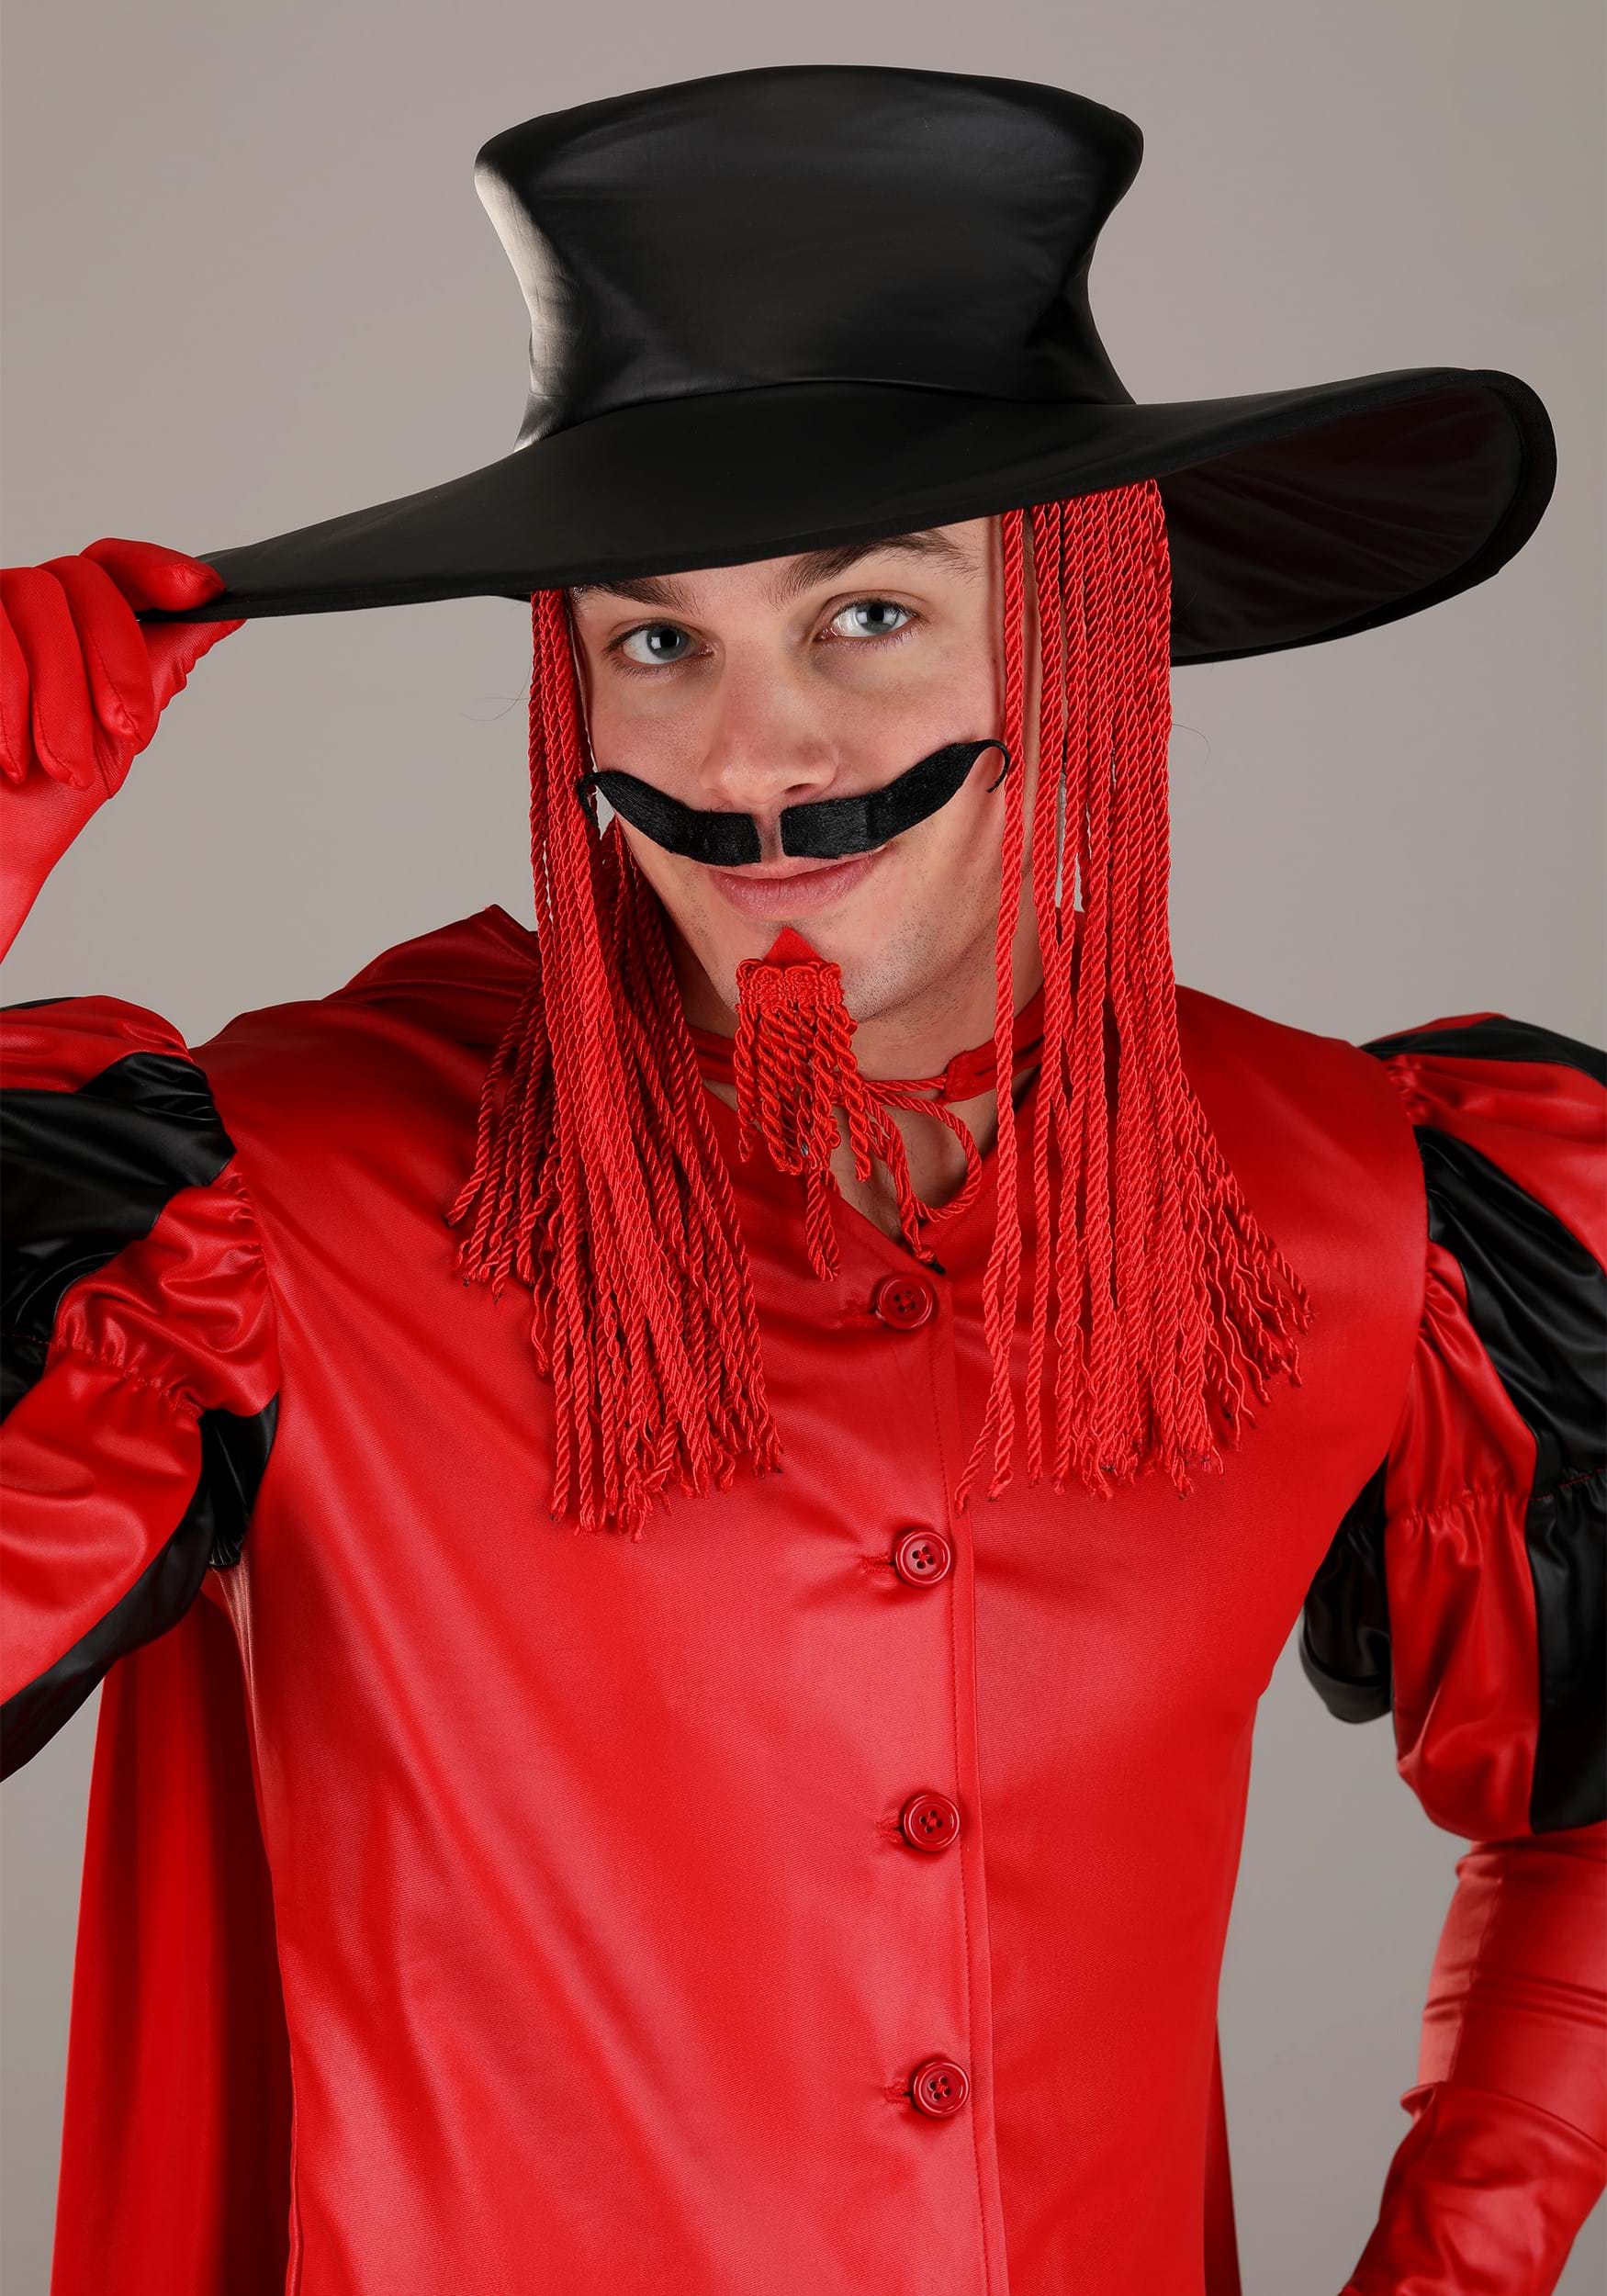 Lord Licorice Candy Land Adult Costume